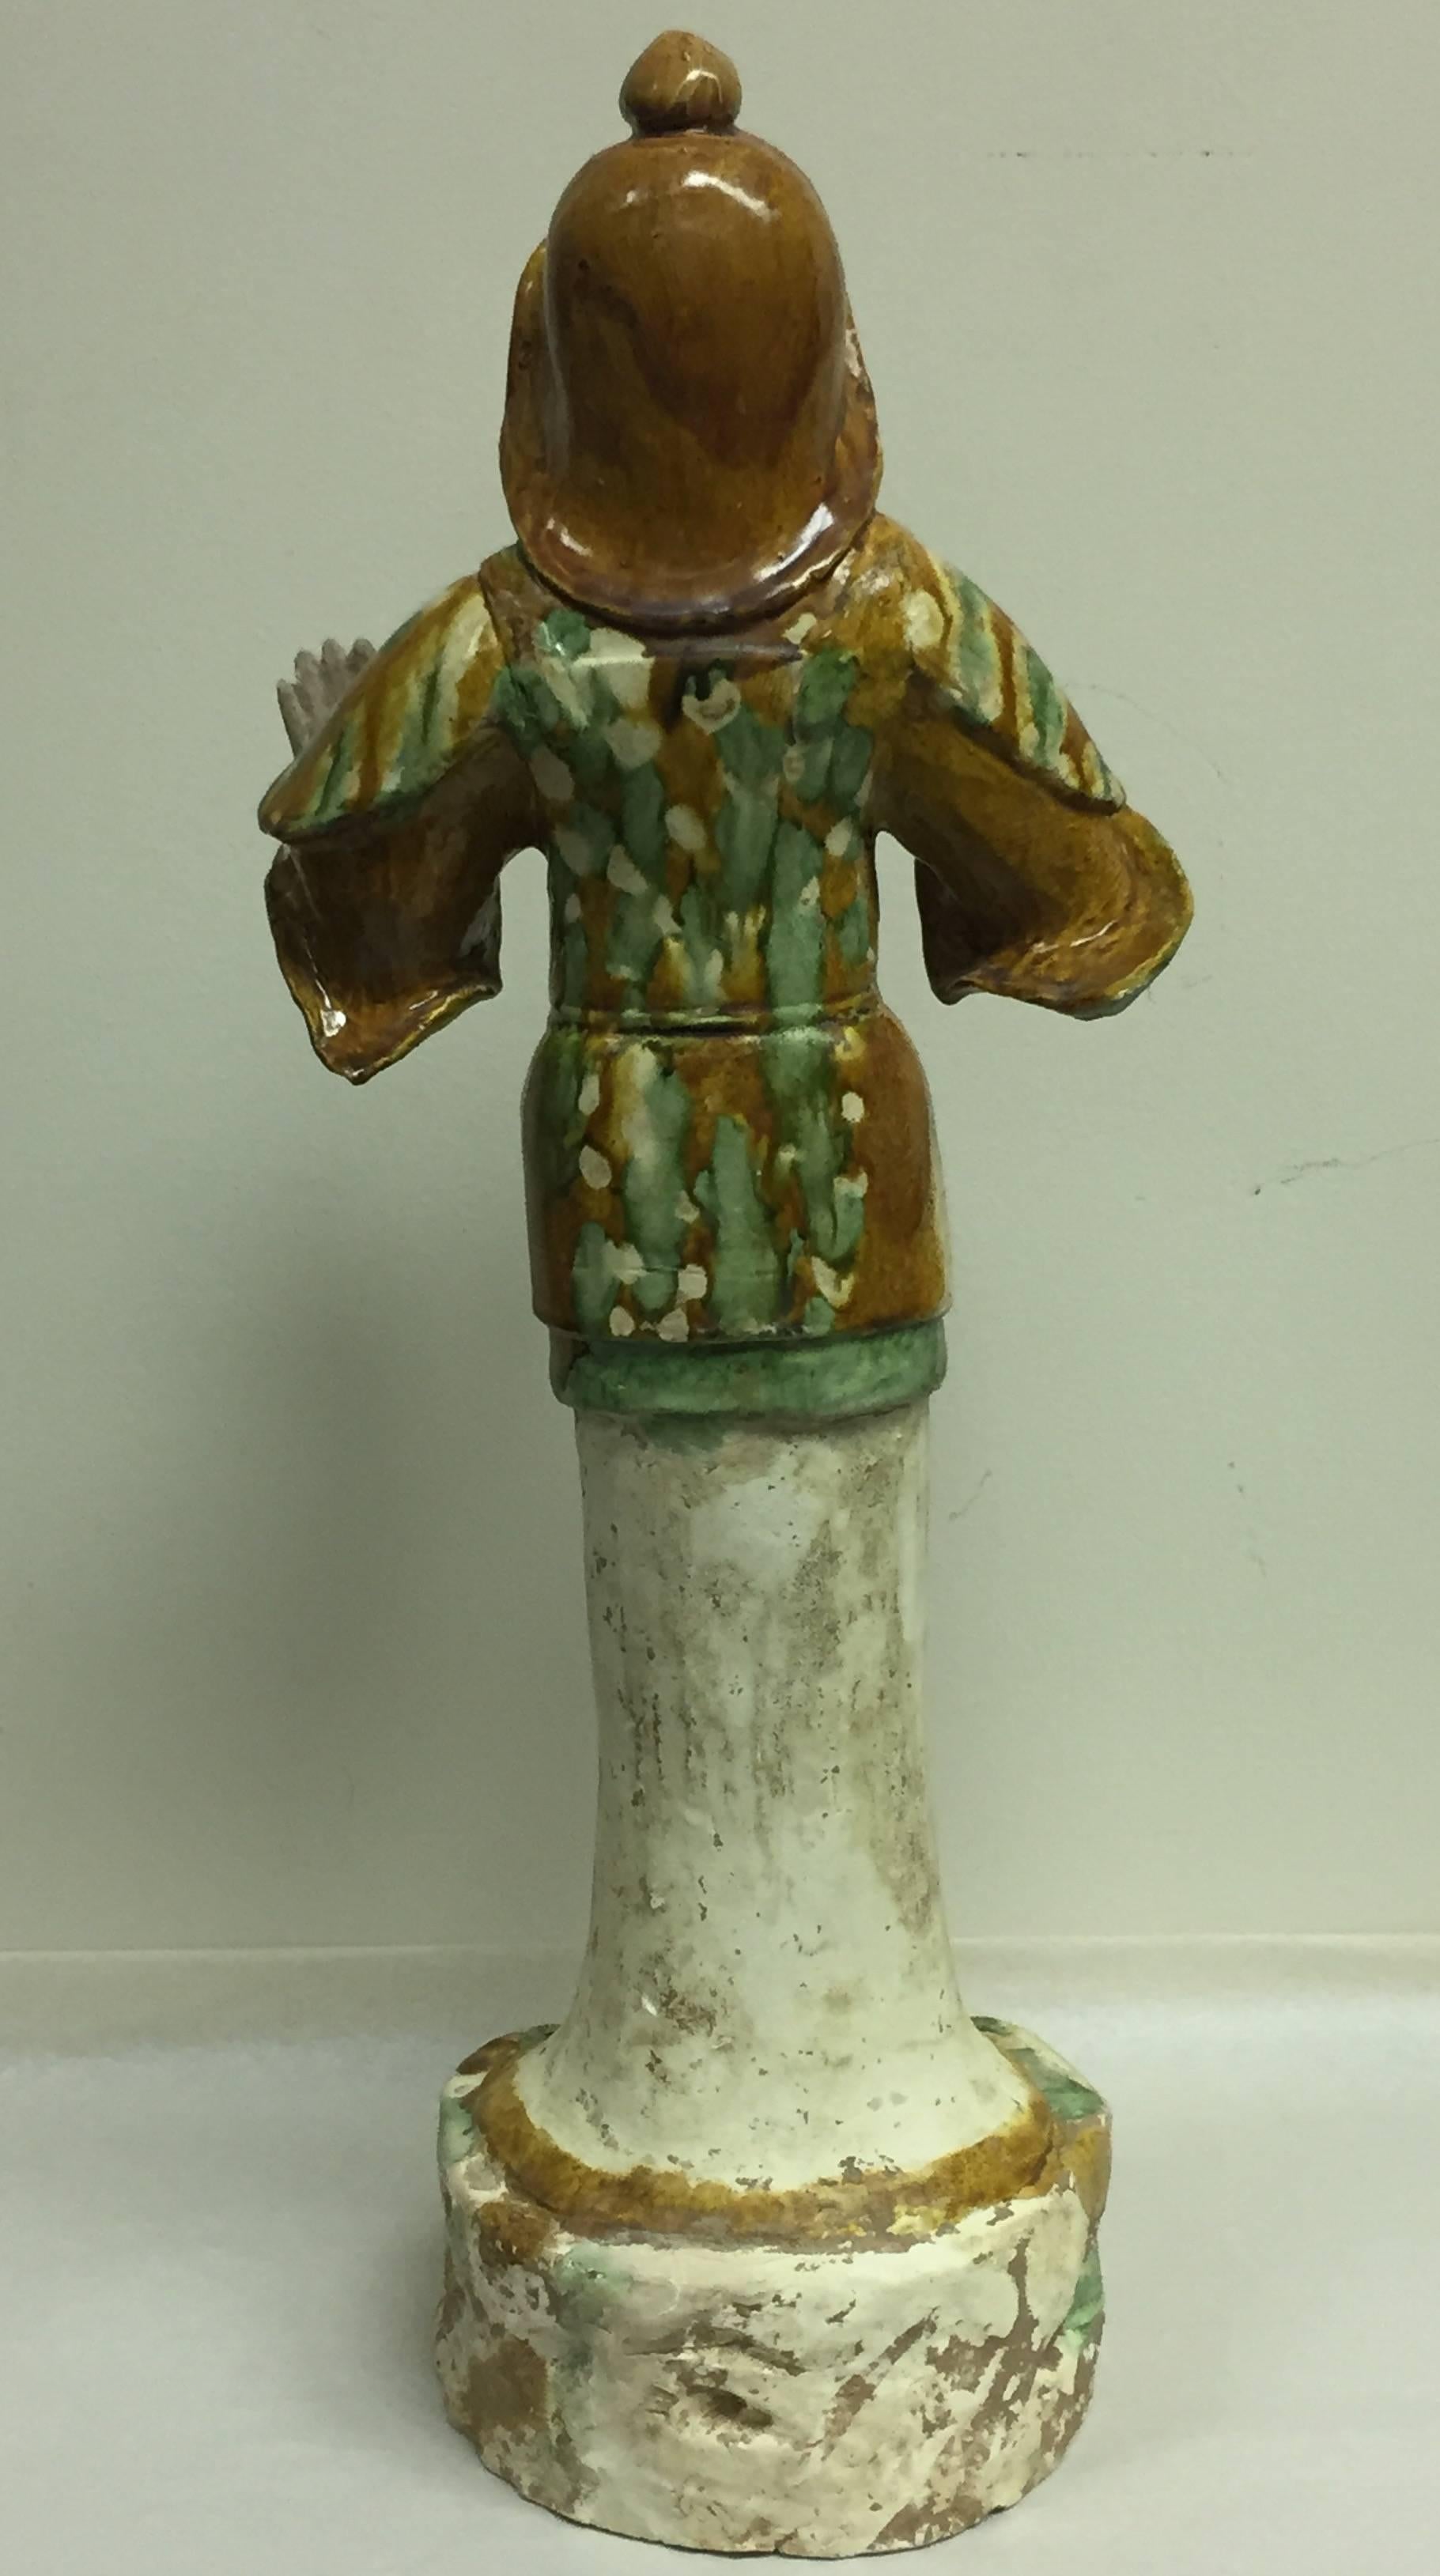 Pottery Antique Sculpture of a 8th Century Tang Dynasty Sancai Glazed Guardian Official For Sale